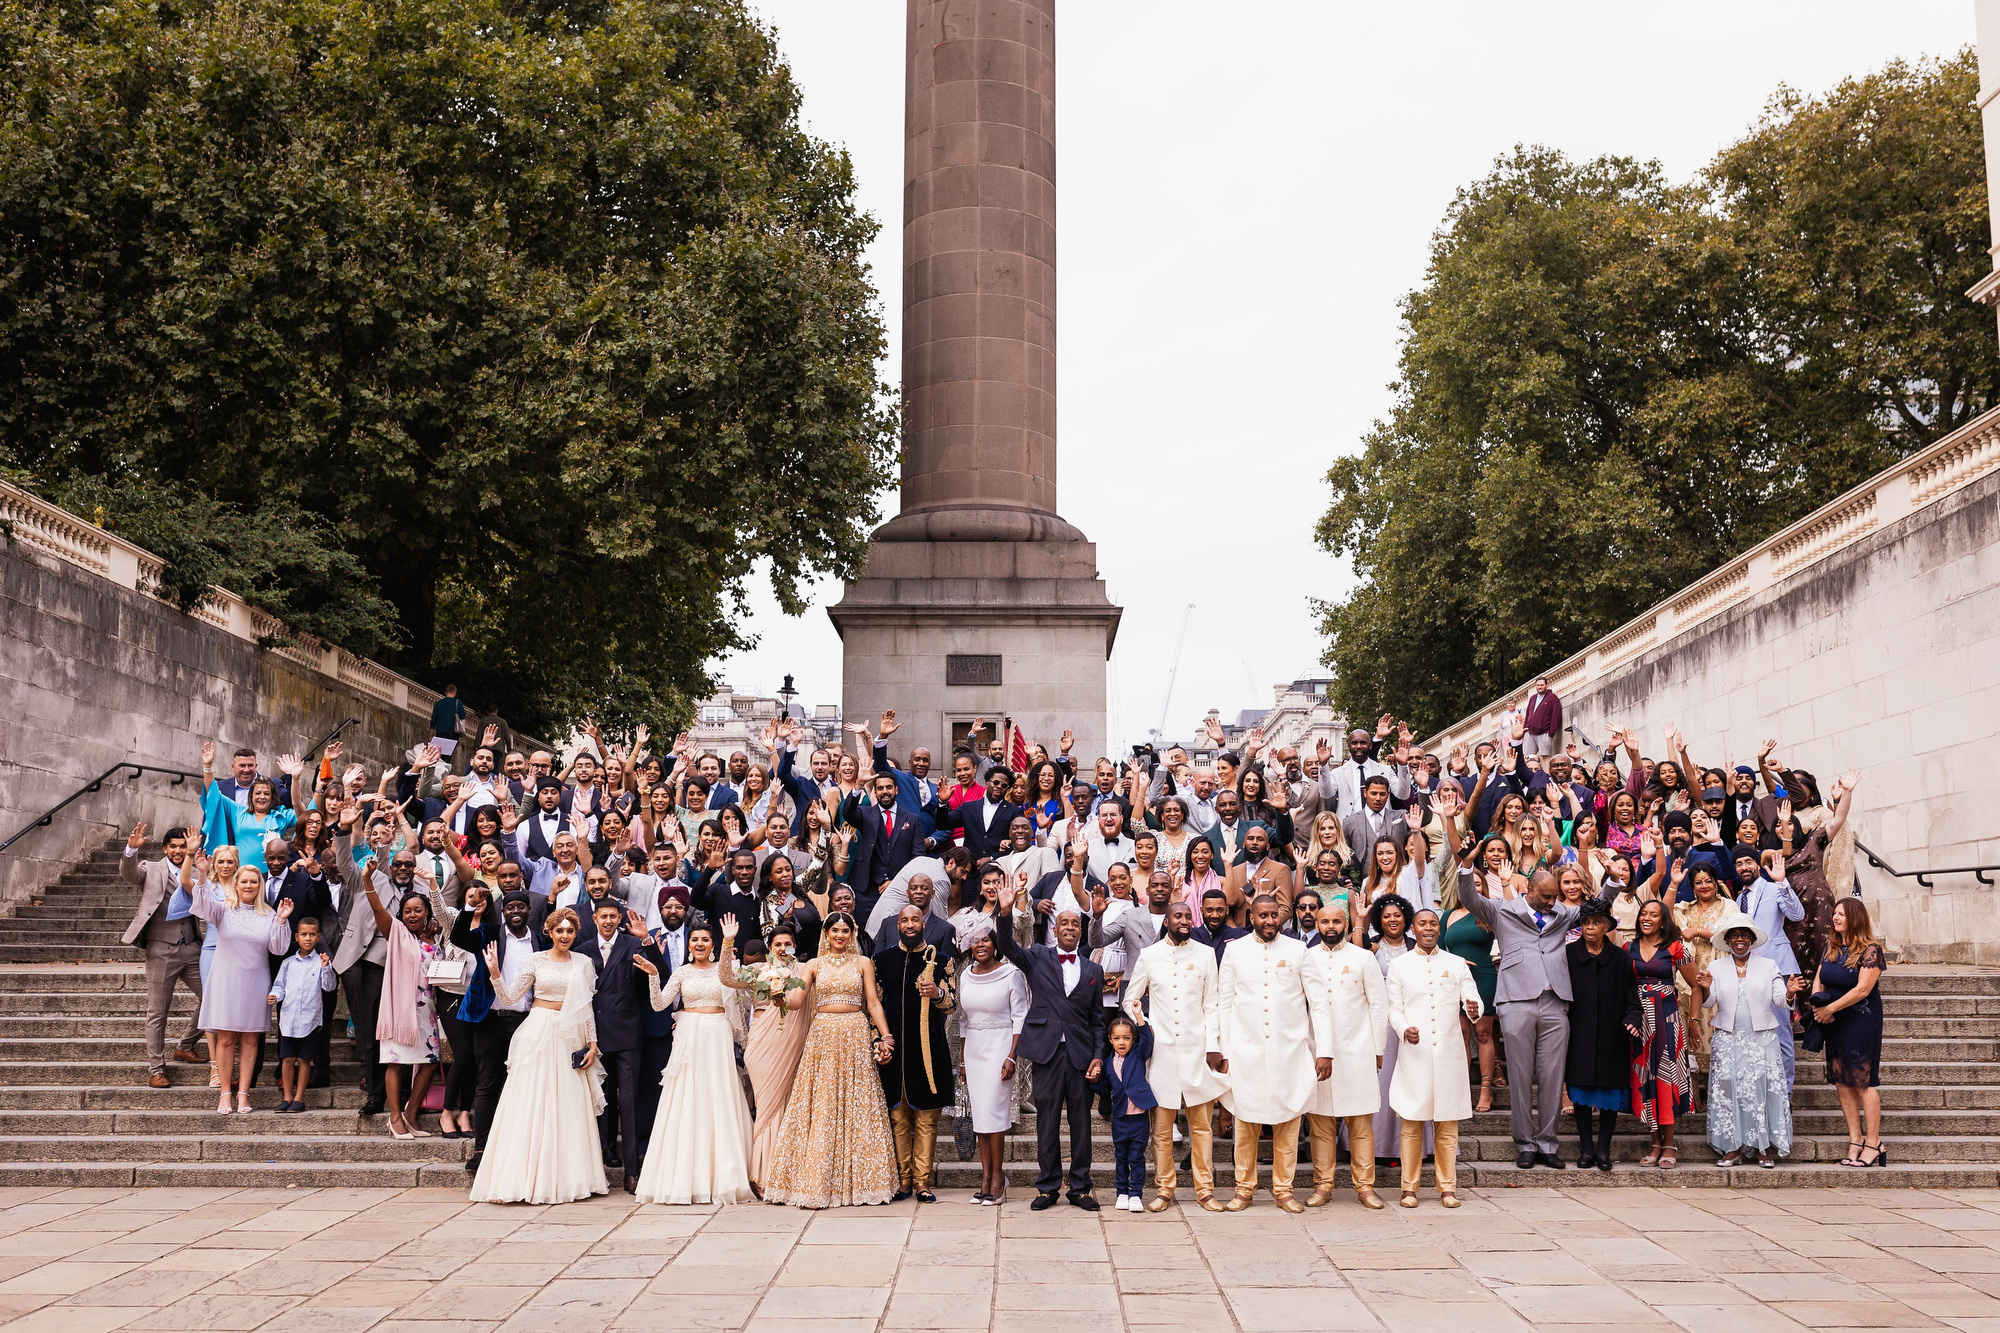 Multicultural wedding, Institute of Directors, IOD, 116 Pall Mall, London